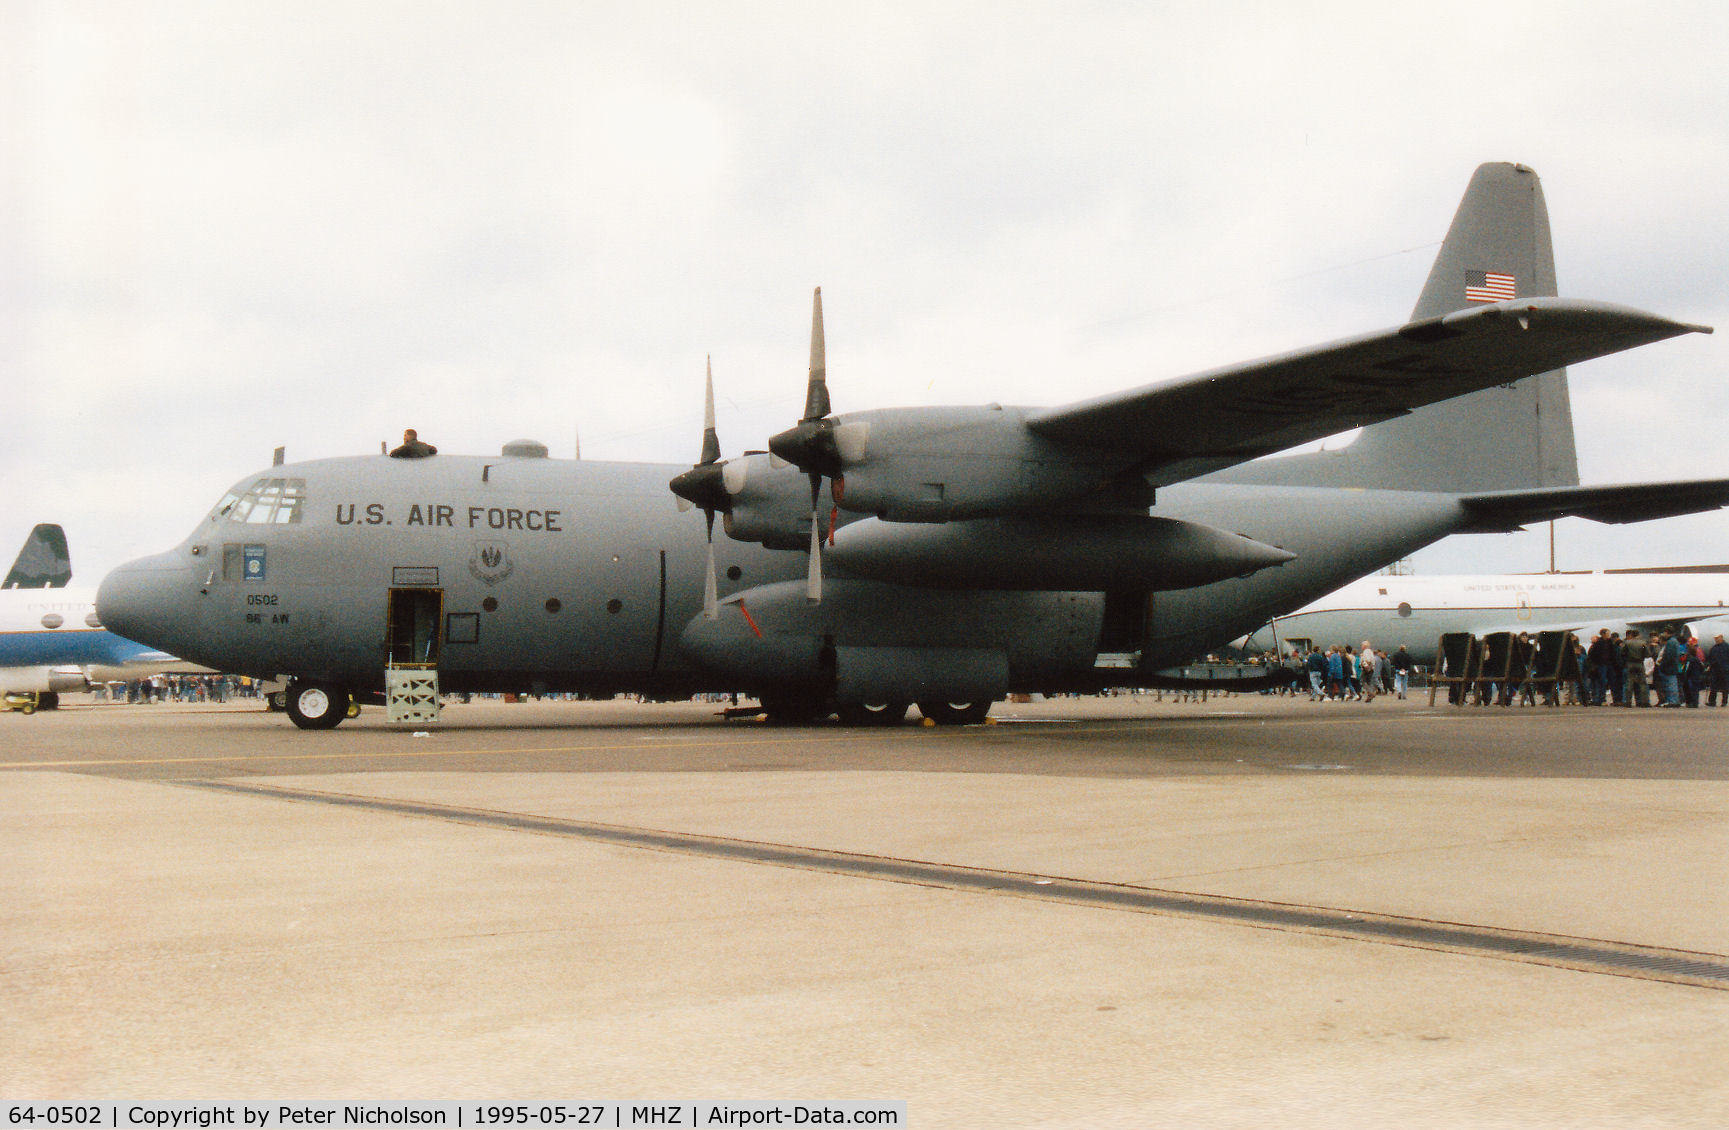 64-0502, 1964 Lockheed C-130E Hercules C/N 382-3986, C-130E Hercules of Ramstein's 86th Airlift Wing on display at the 1995 RAF Mildenhall Air Fete.